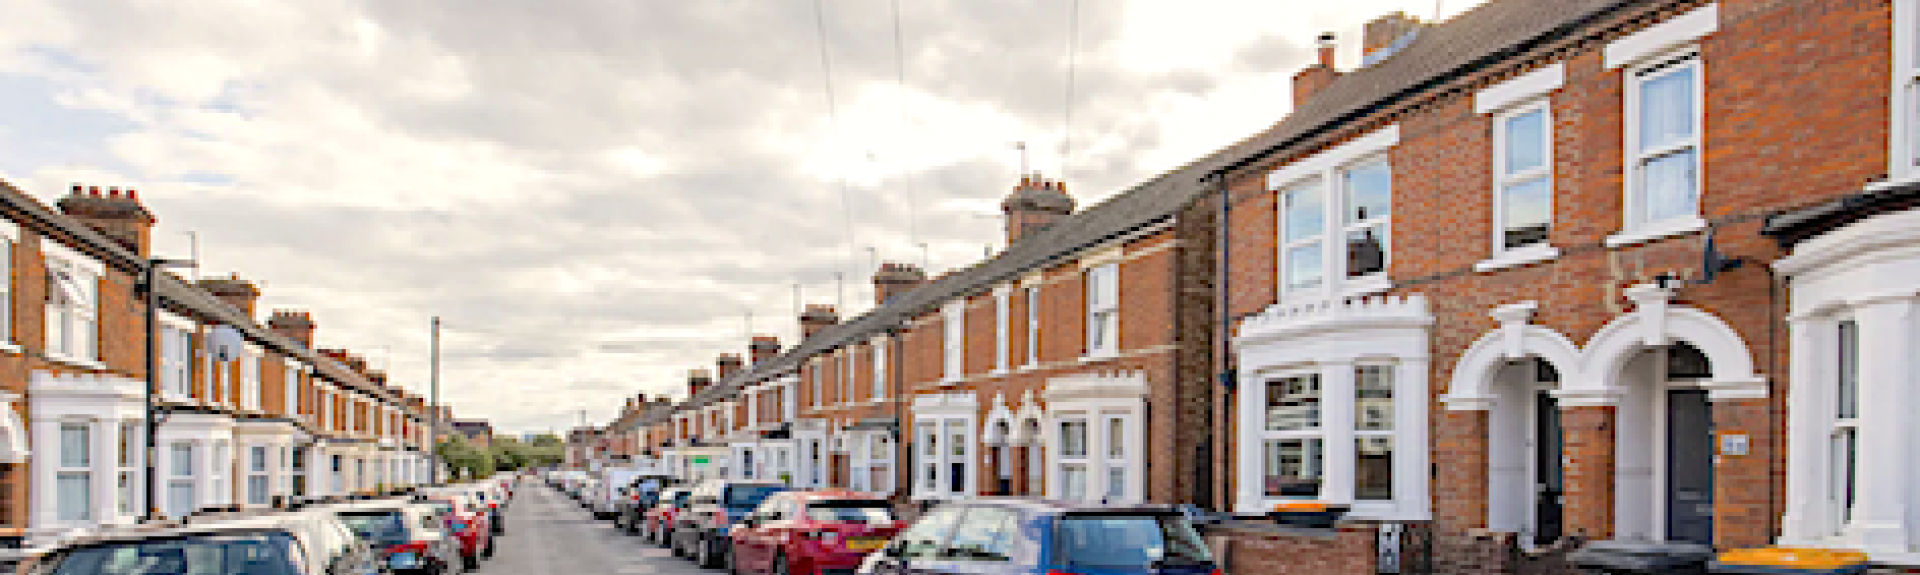 A terrace of brick-built Victorian houses with large bay windows overlook a street.